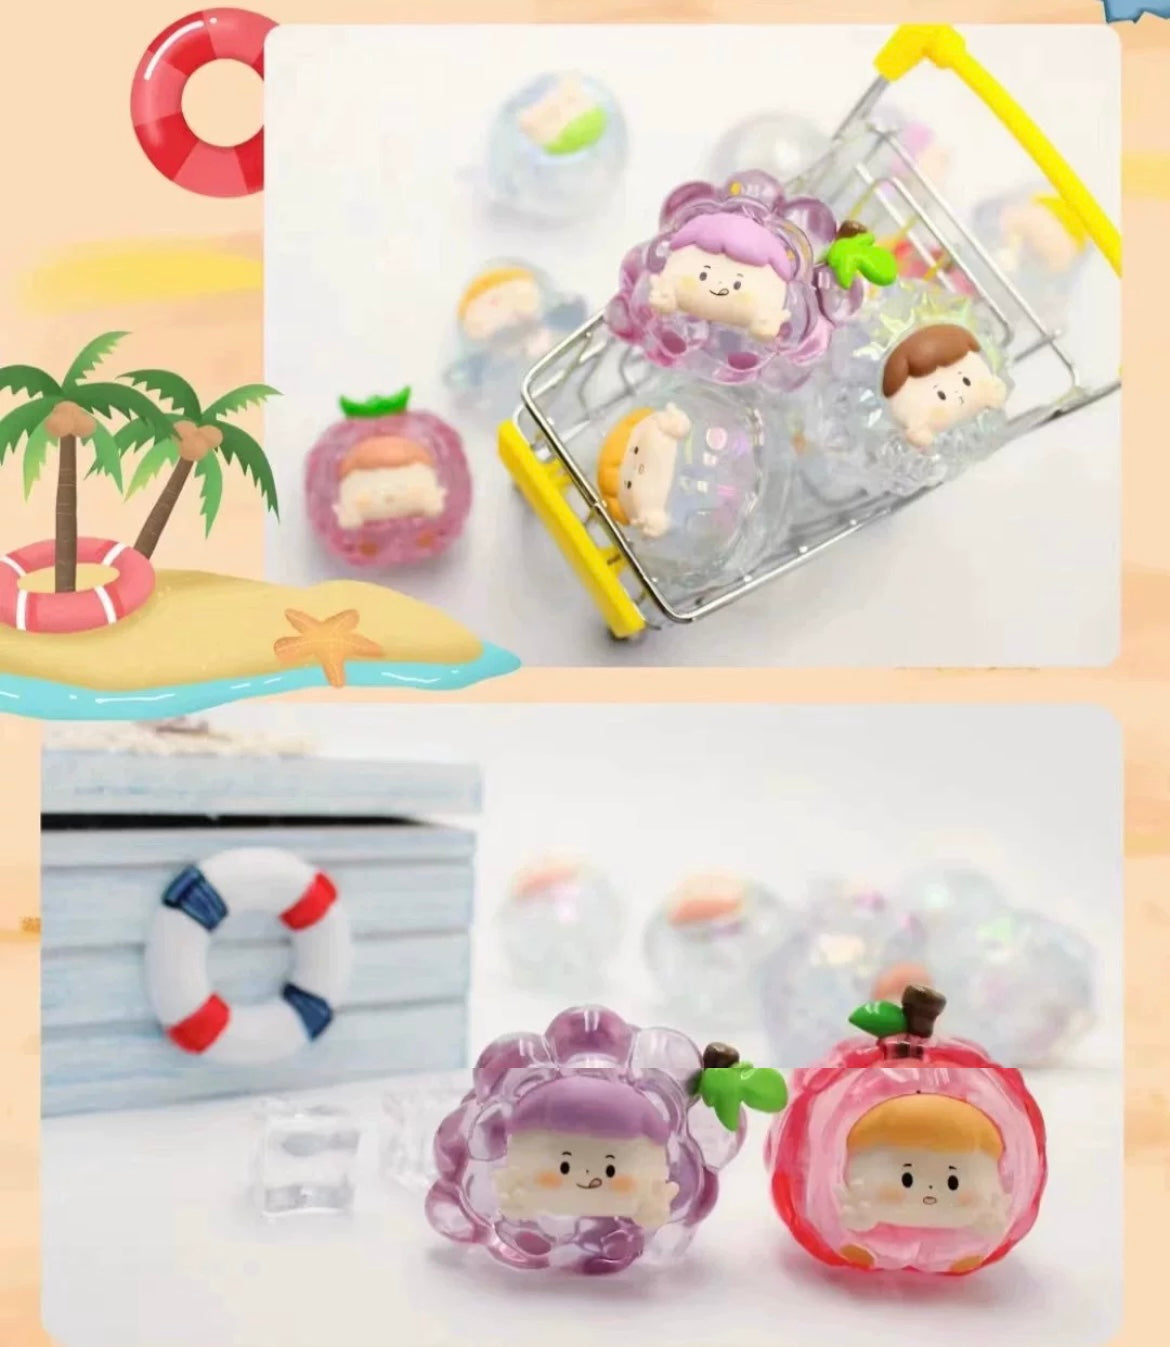 【SALE】Naughty fruit and vegetable mini bean version 2, 4 beans in 1 bag